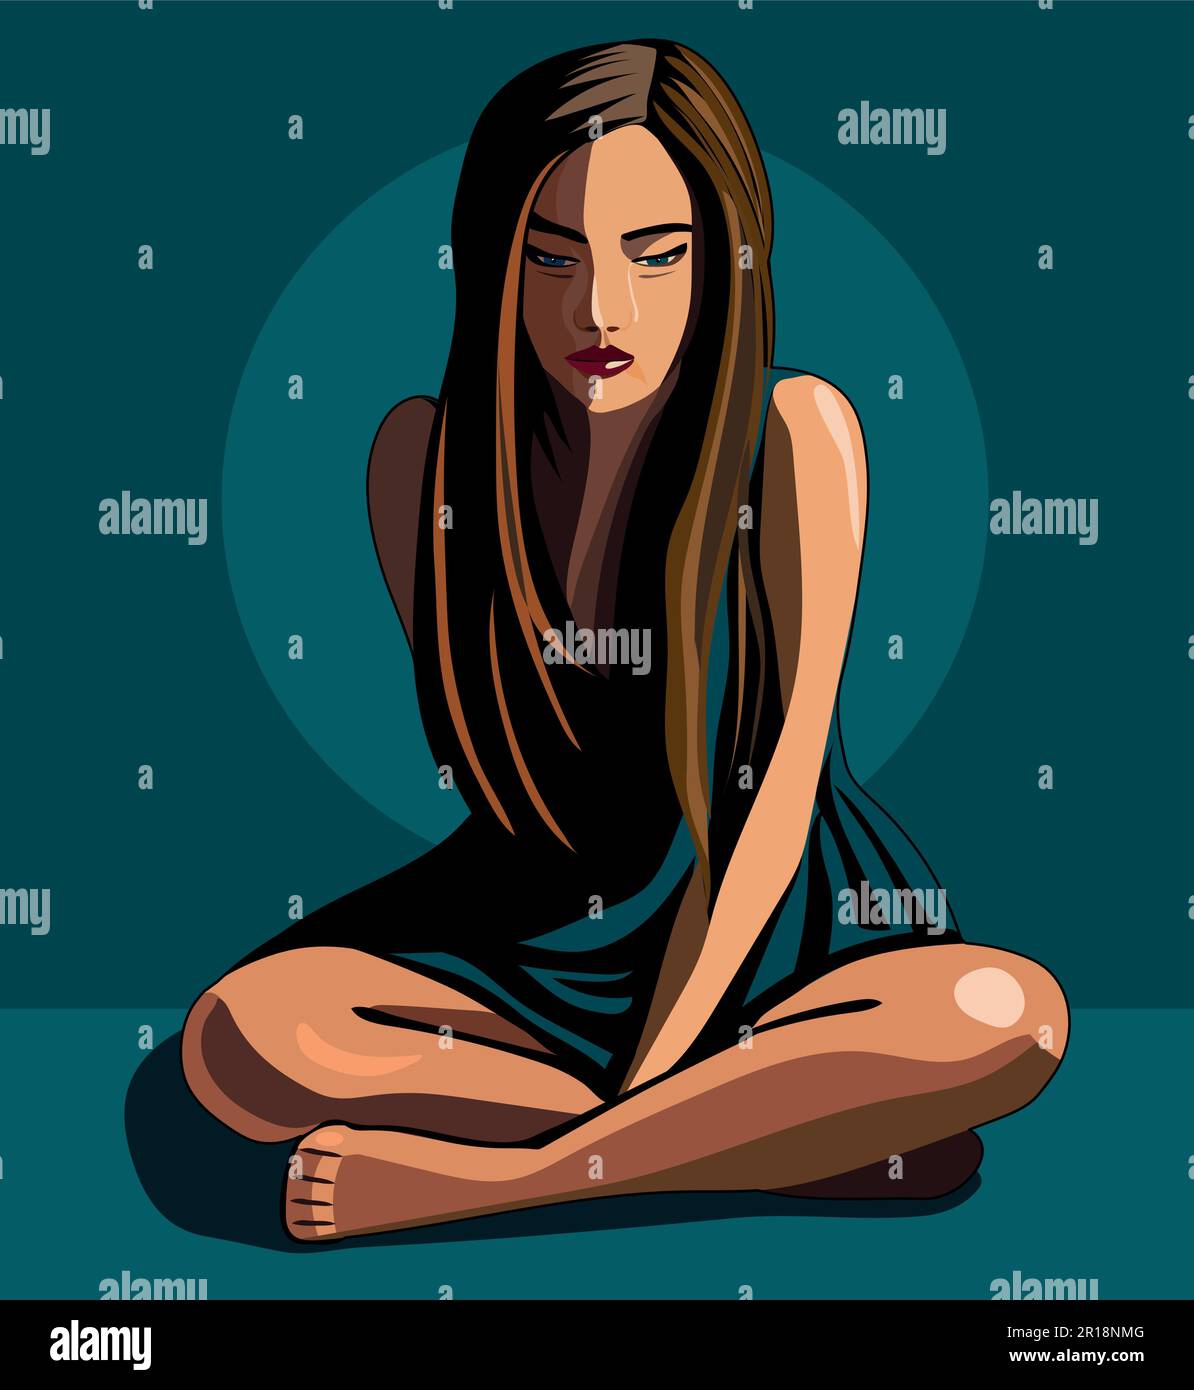 Sexual assault, abuse, social problems, bullying, girl sitting on the floor crying, helpless. Problems in the family. Violence against minors Stock Vector